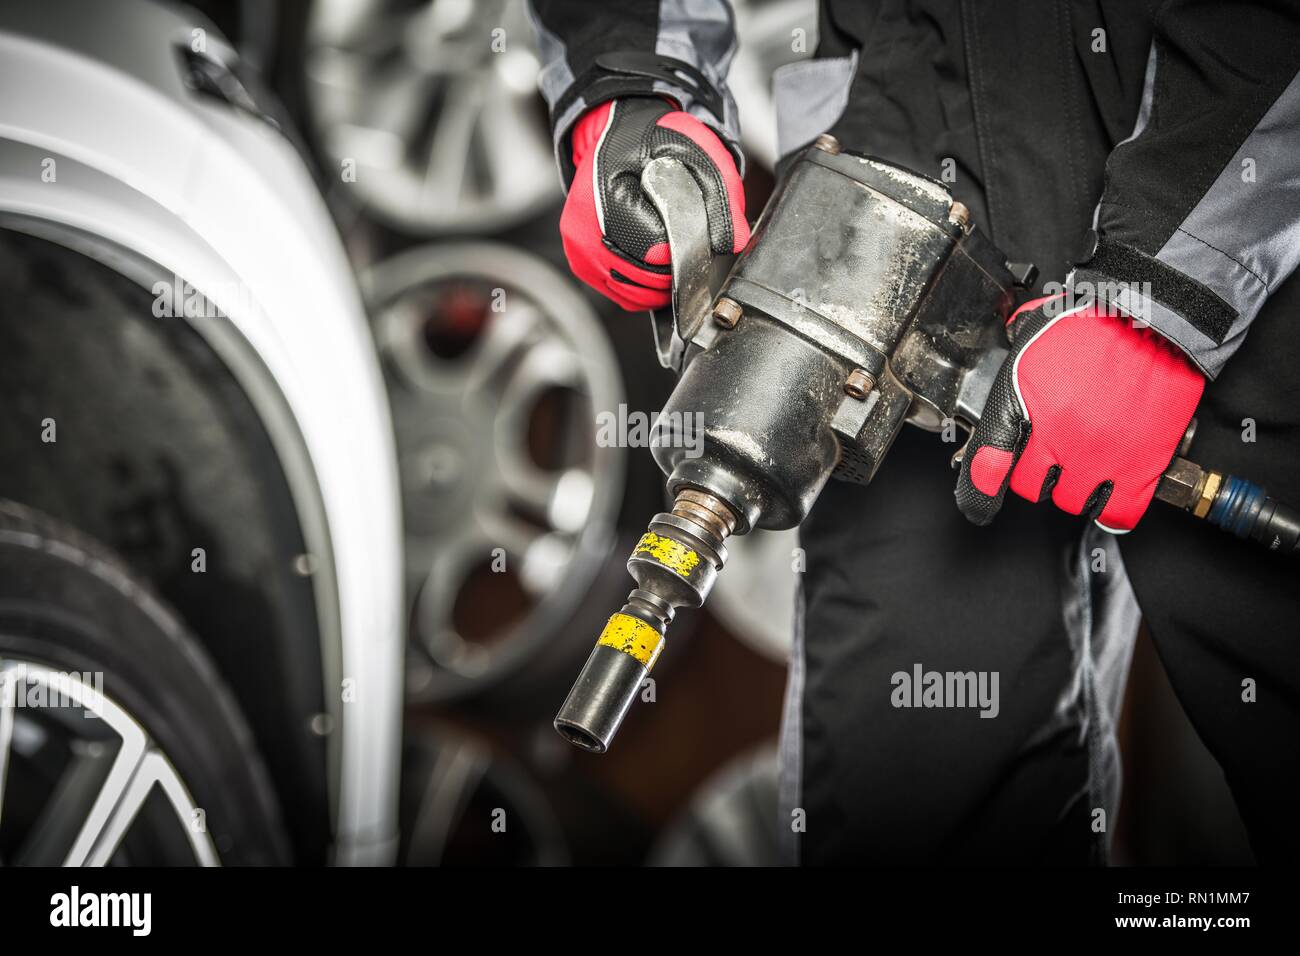 Auto Service Worker with Heavy Duty Pneumatic Gun Preparing For Seasonal Tire Changes. Stock Photo